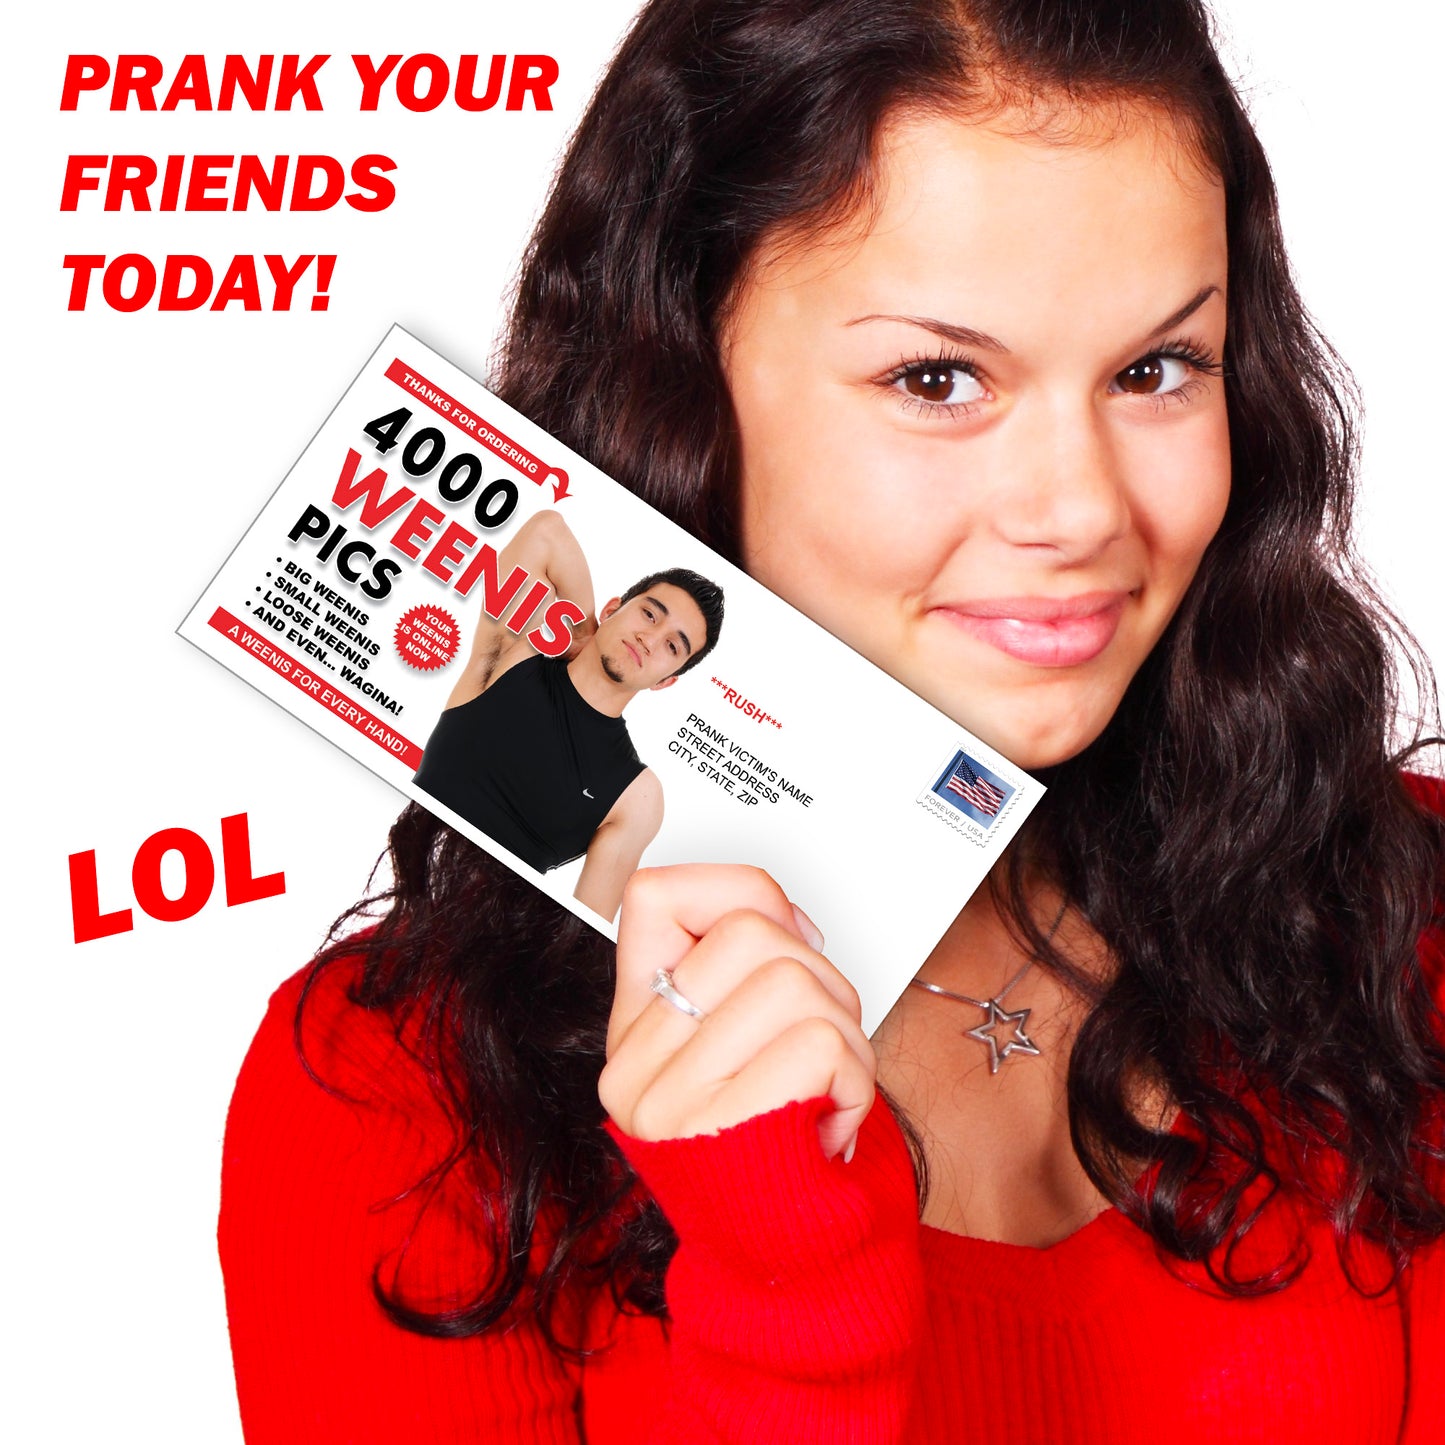 4000 Weenis Pics Anonymous Mail Prank Letter